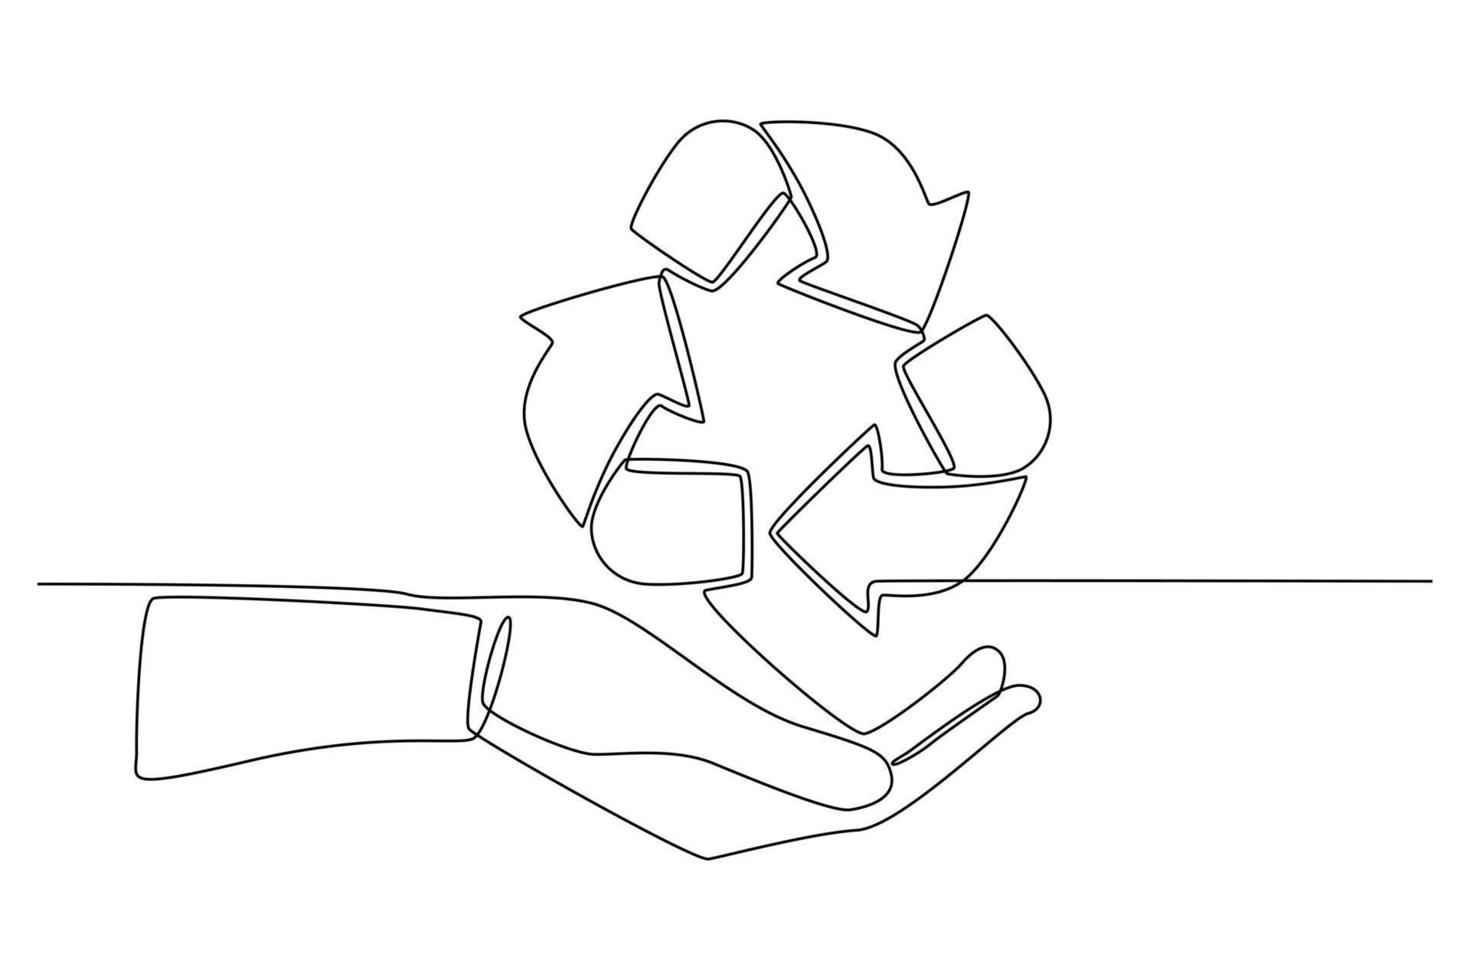 Continuous one line drawing recycle icon on the hand. Eco packaging concept. Single line draw design vector graphic illustration.